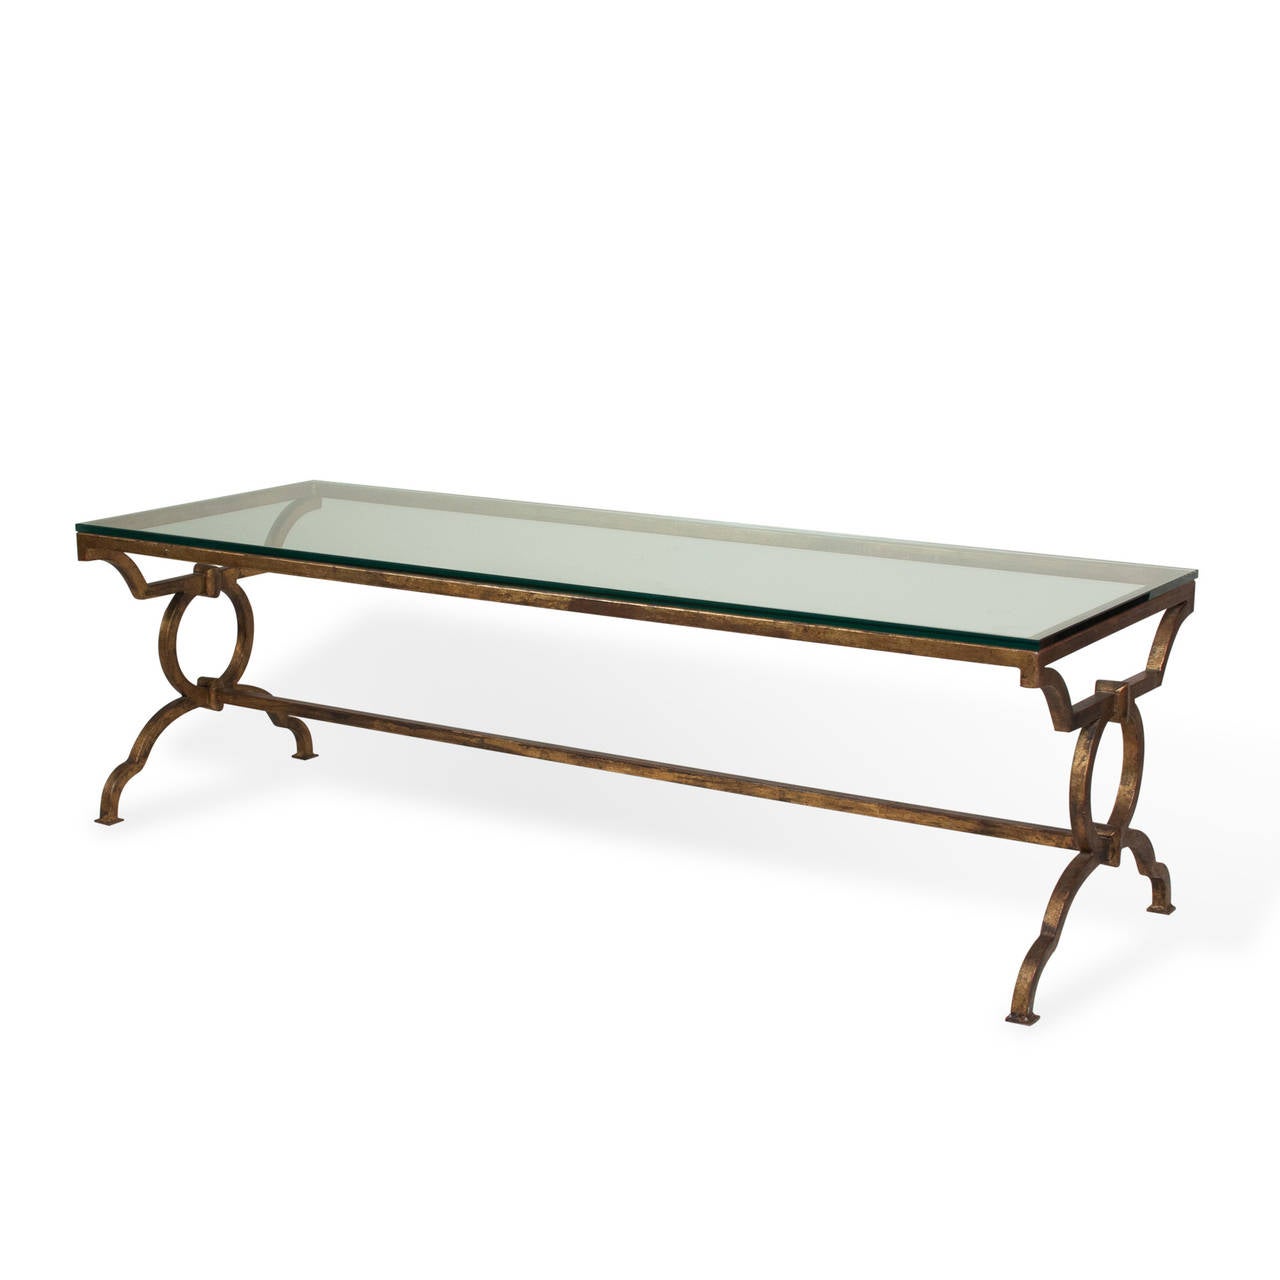 Gilt iron coffee table, with curved legs, end circle elements and cross stretcher, clear glass top, French, 1960s. In the style of Ramsay. Dimensions: Length 60 in, width 24 in, height 16 1/2 in. (Item #2276).